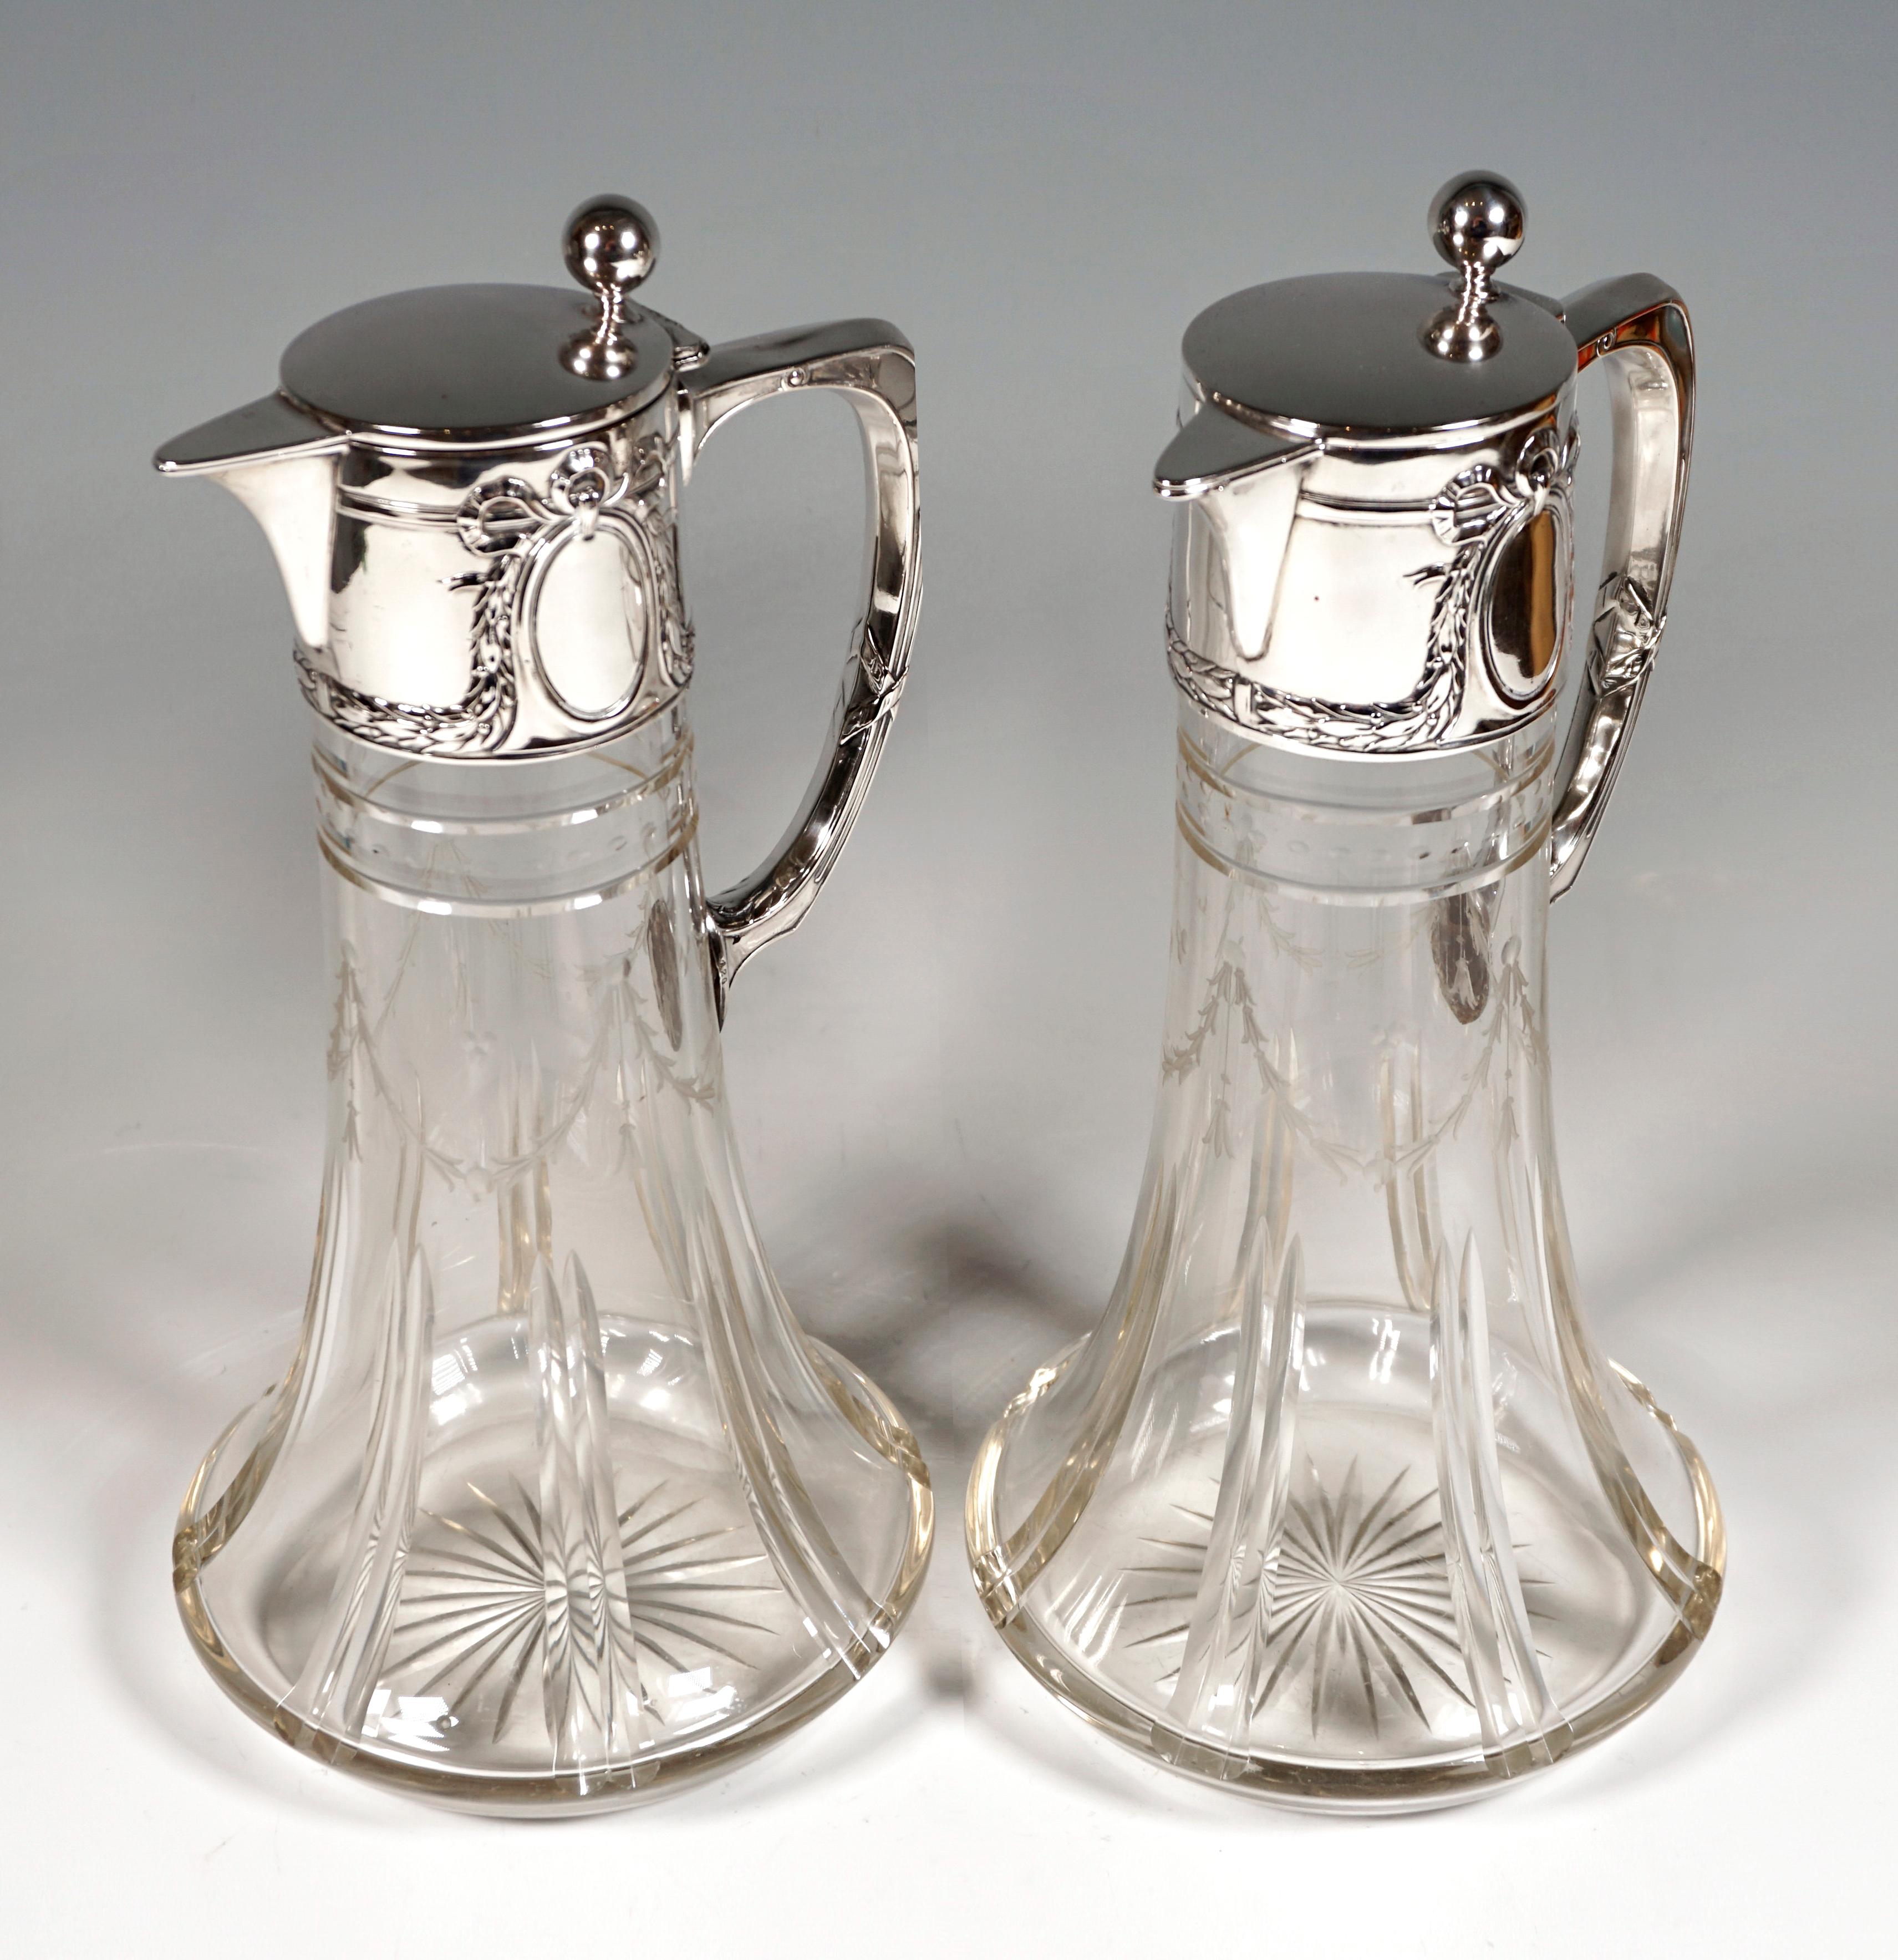 Faceted Pair of Art Nouveau Glass Decanter with Silver Fittings, Wilhelm Binder, Germany